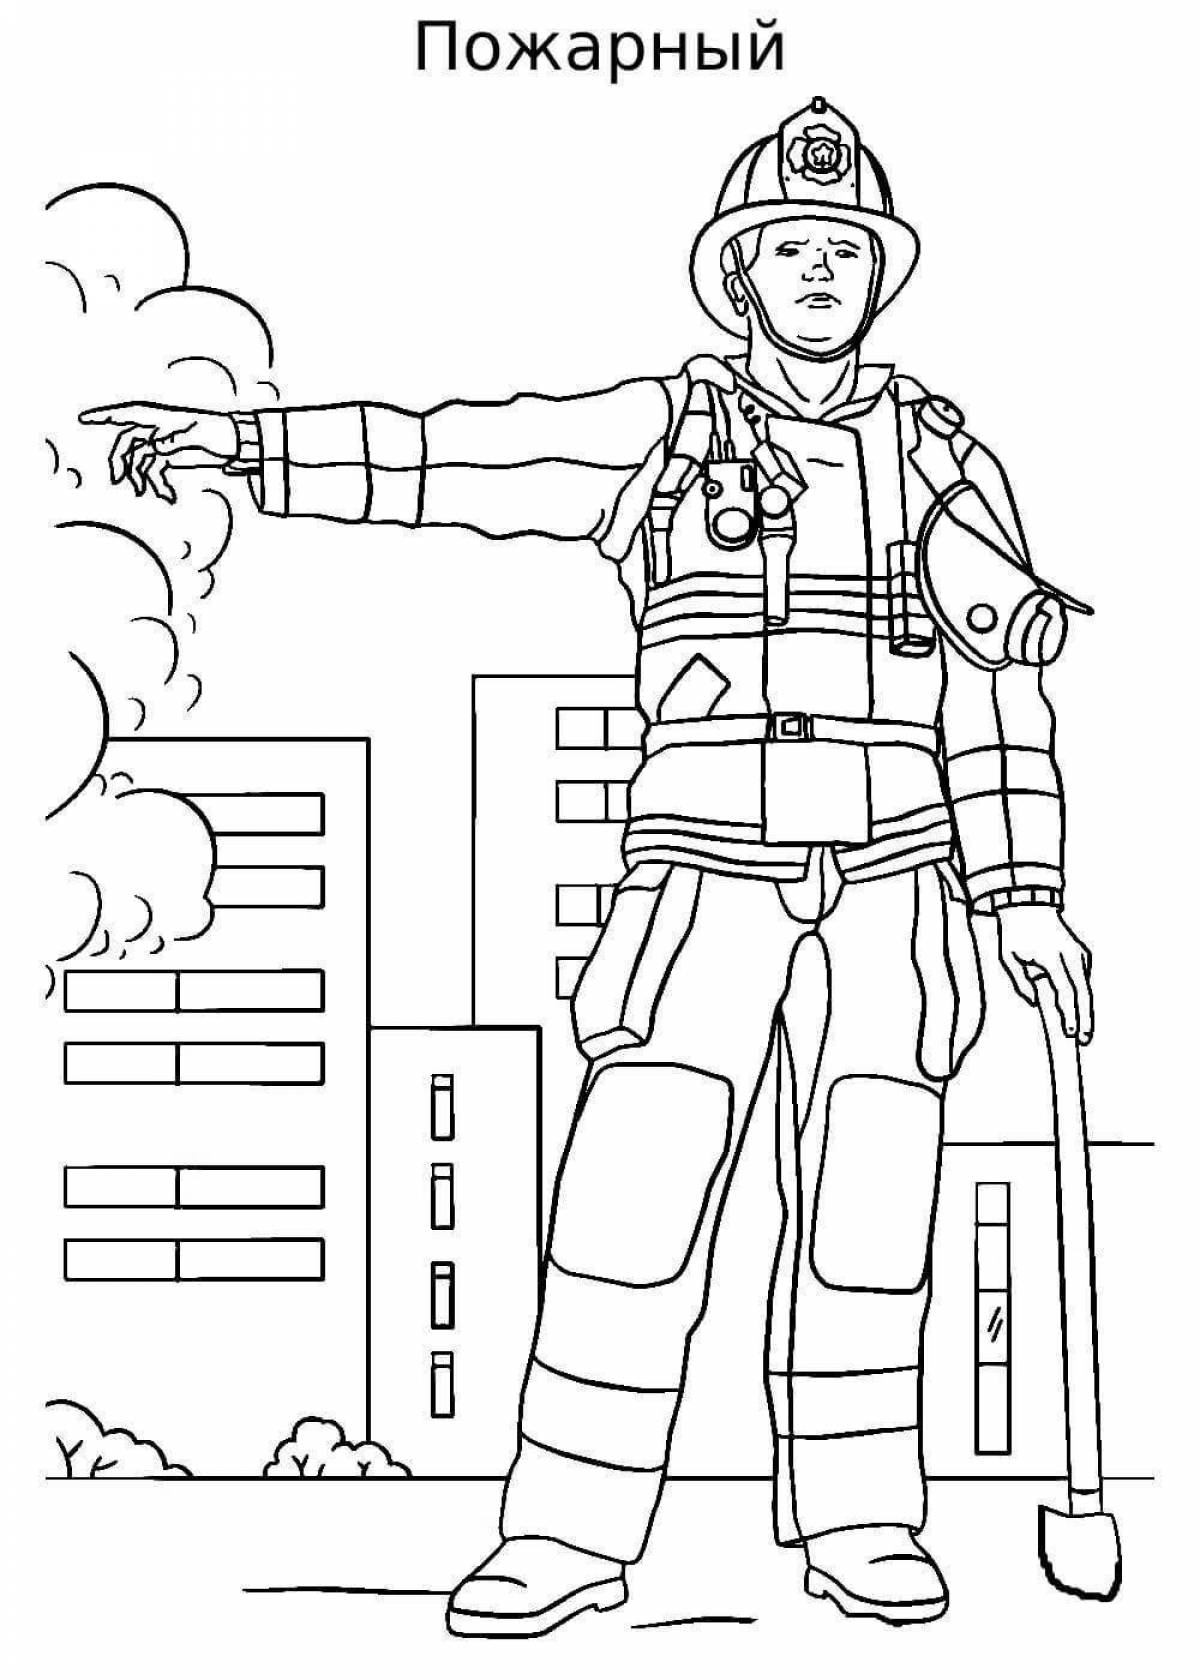 Creative fire safety coloring book for 5-6 year olds